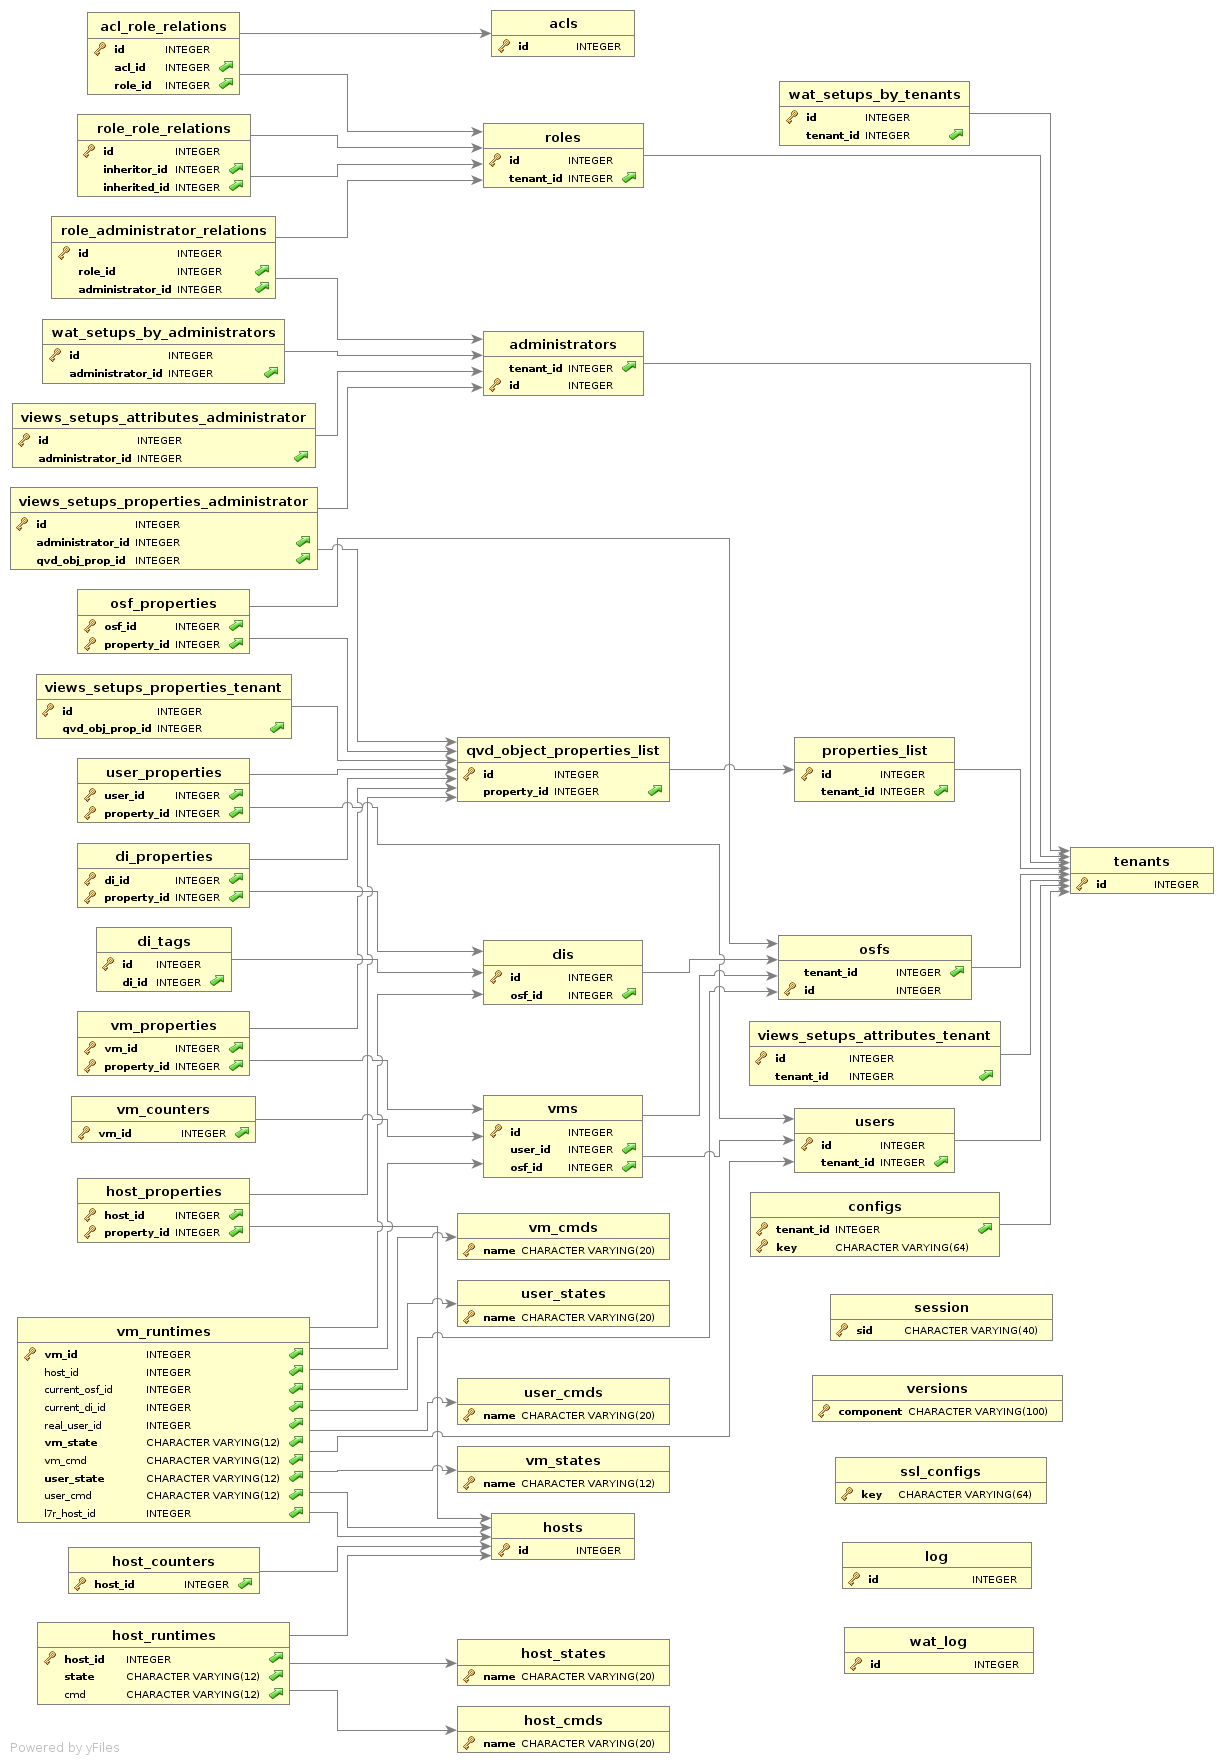 Architecture_images/db_schema.png